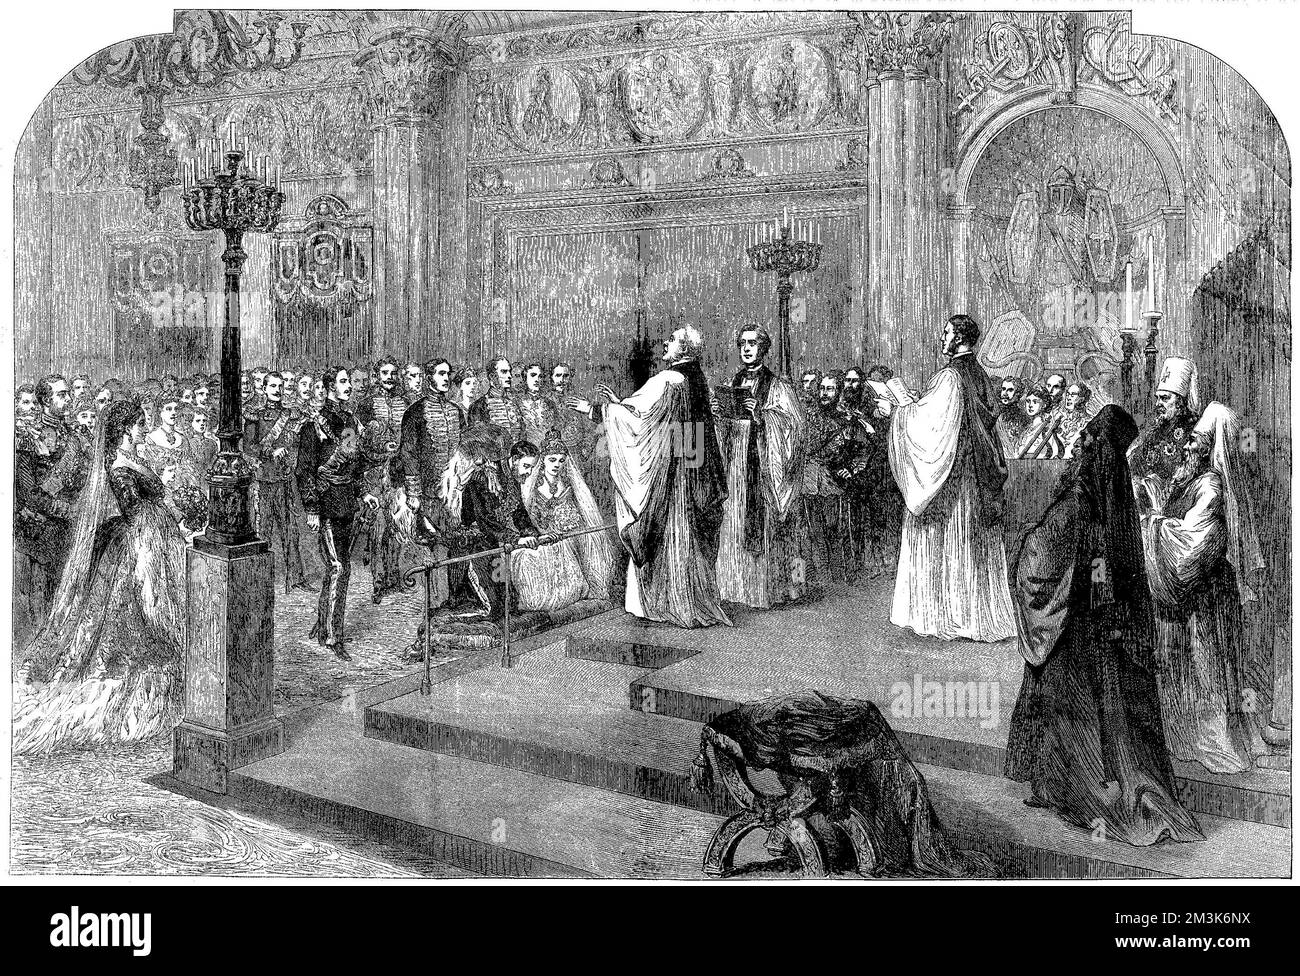 Prince Alfred, Duke of Edinburgh and his Russian bride, Grand Duchess Marie Alexandrovna kneeling at the altar during the English wedding ceremony in the Alexander Hall of the Winter Palace on January 23rd 1874, conducted by Dr. Stanley, Dean of Westminster. Queen Victoria, who was reluctant to agree to the match, did not attend the wedding in St. Petersburg but Edward, Prince of Wales and Prince Arthur of Connaught were present. A Greek Orthodox ceremony was also carried out in the Imperial Chapel of the palace on the same day.  23 January 1874 Stock Photo